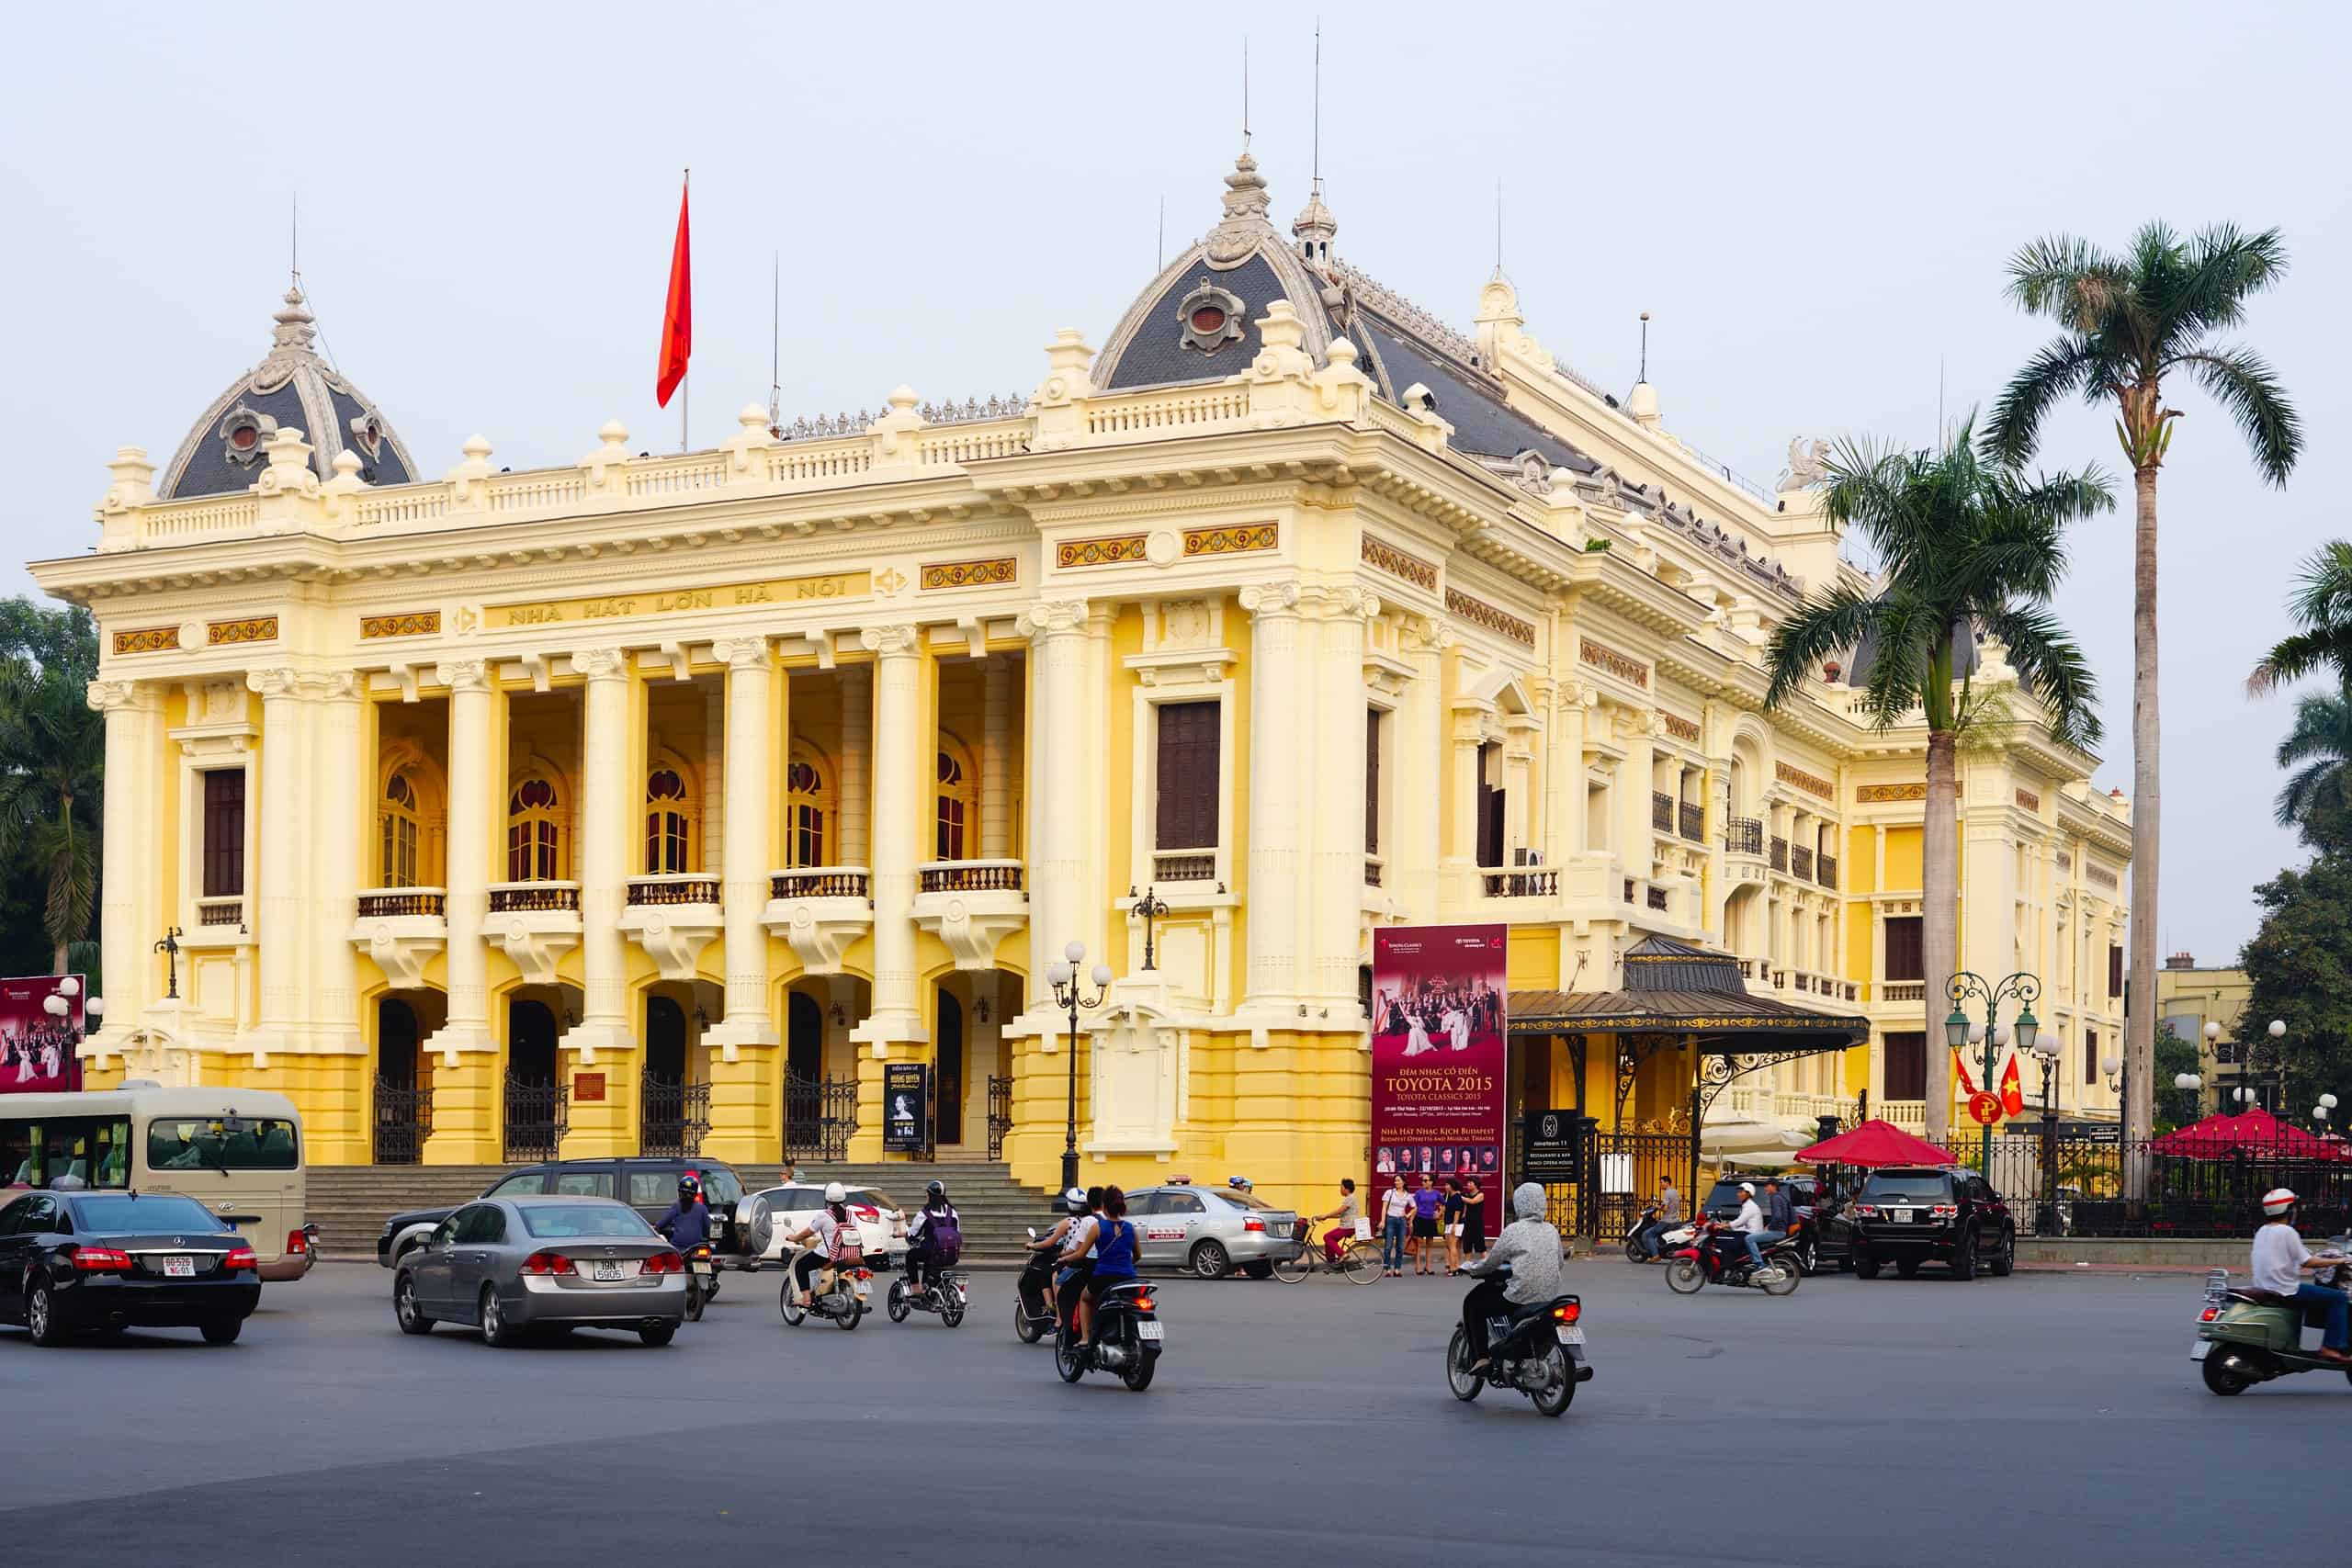 Hanoi French Quarter: Things You Should Know Before Going